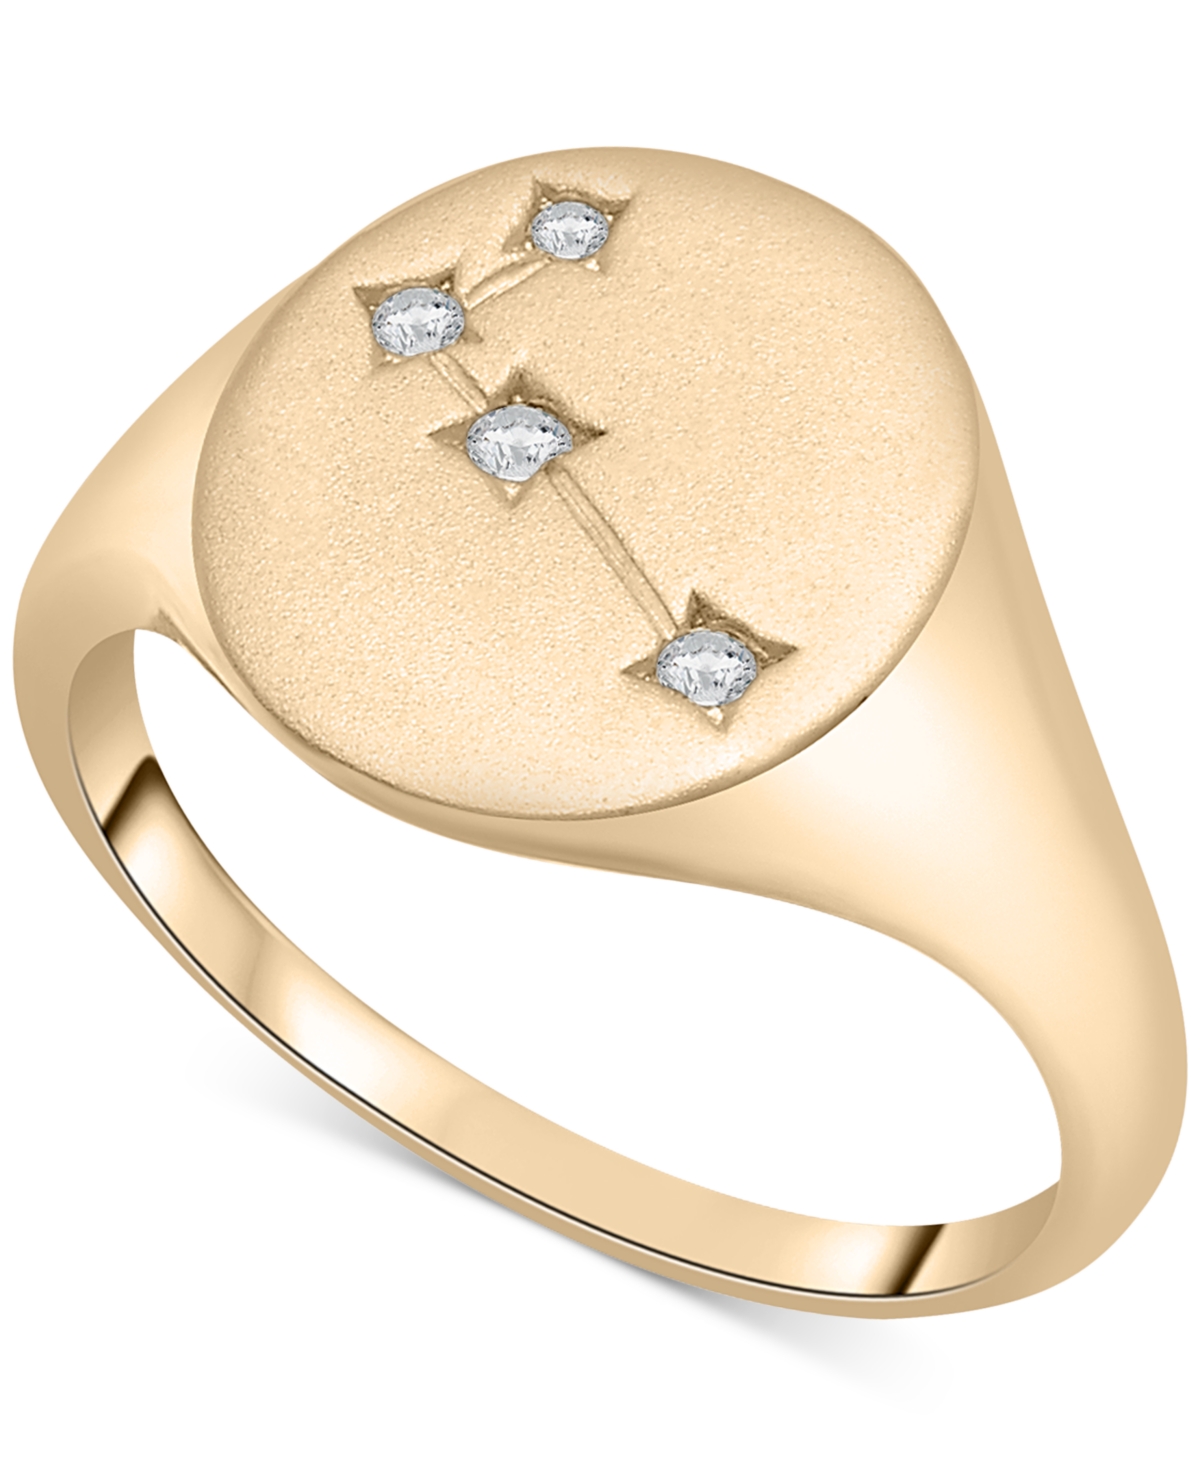 Diamond Aries Constellation Ring (1/20 ct. t.w.) in 10k Gold, Created for Macy's - Yellow Gold